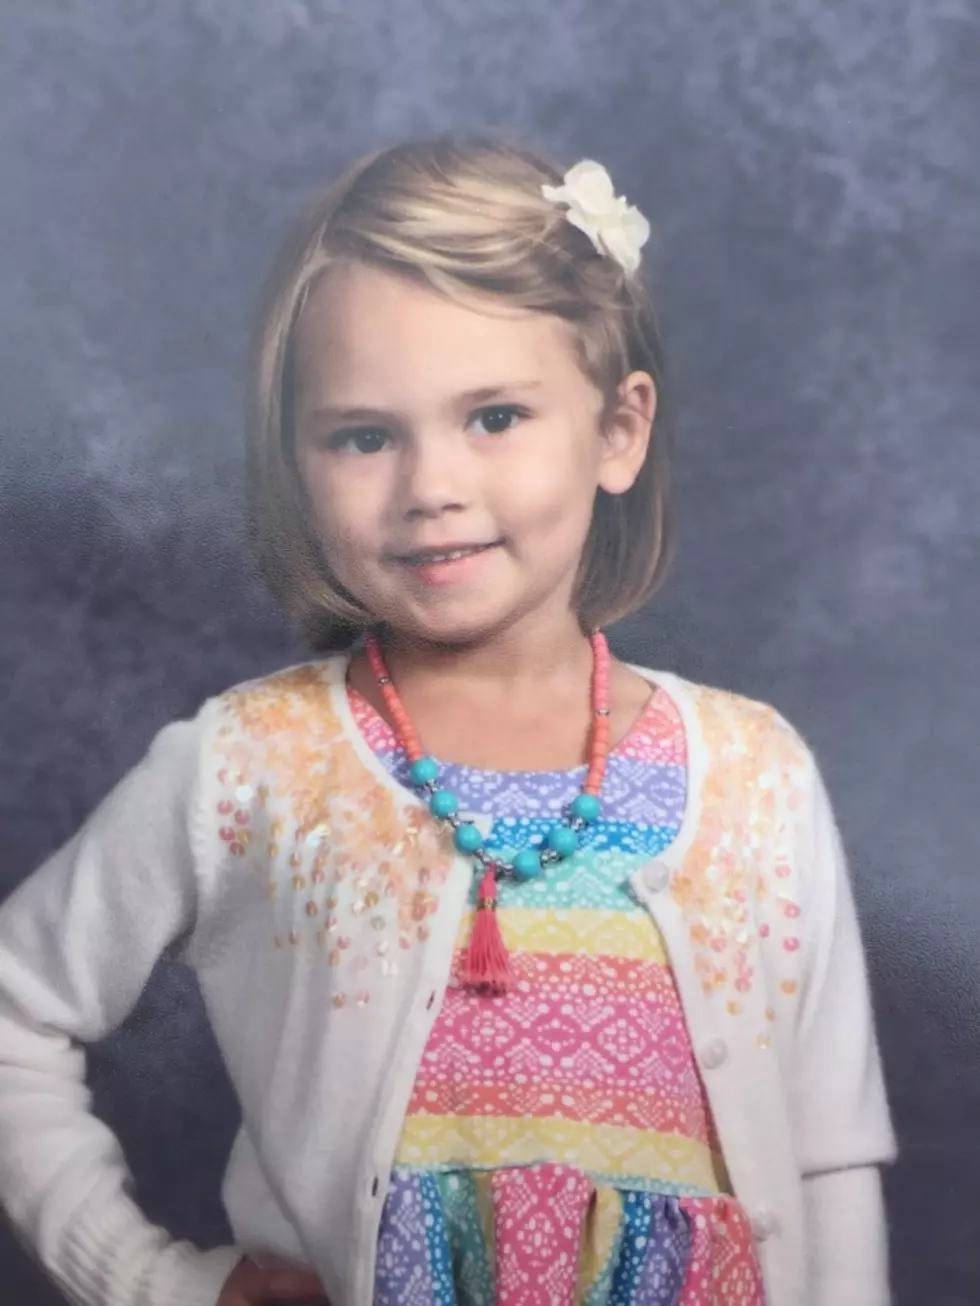 Meeker County Asking For Help in Finding Missing Five Year Old Girl 